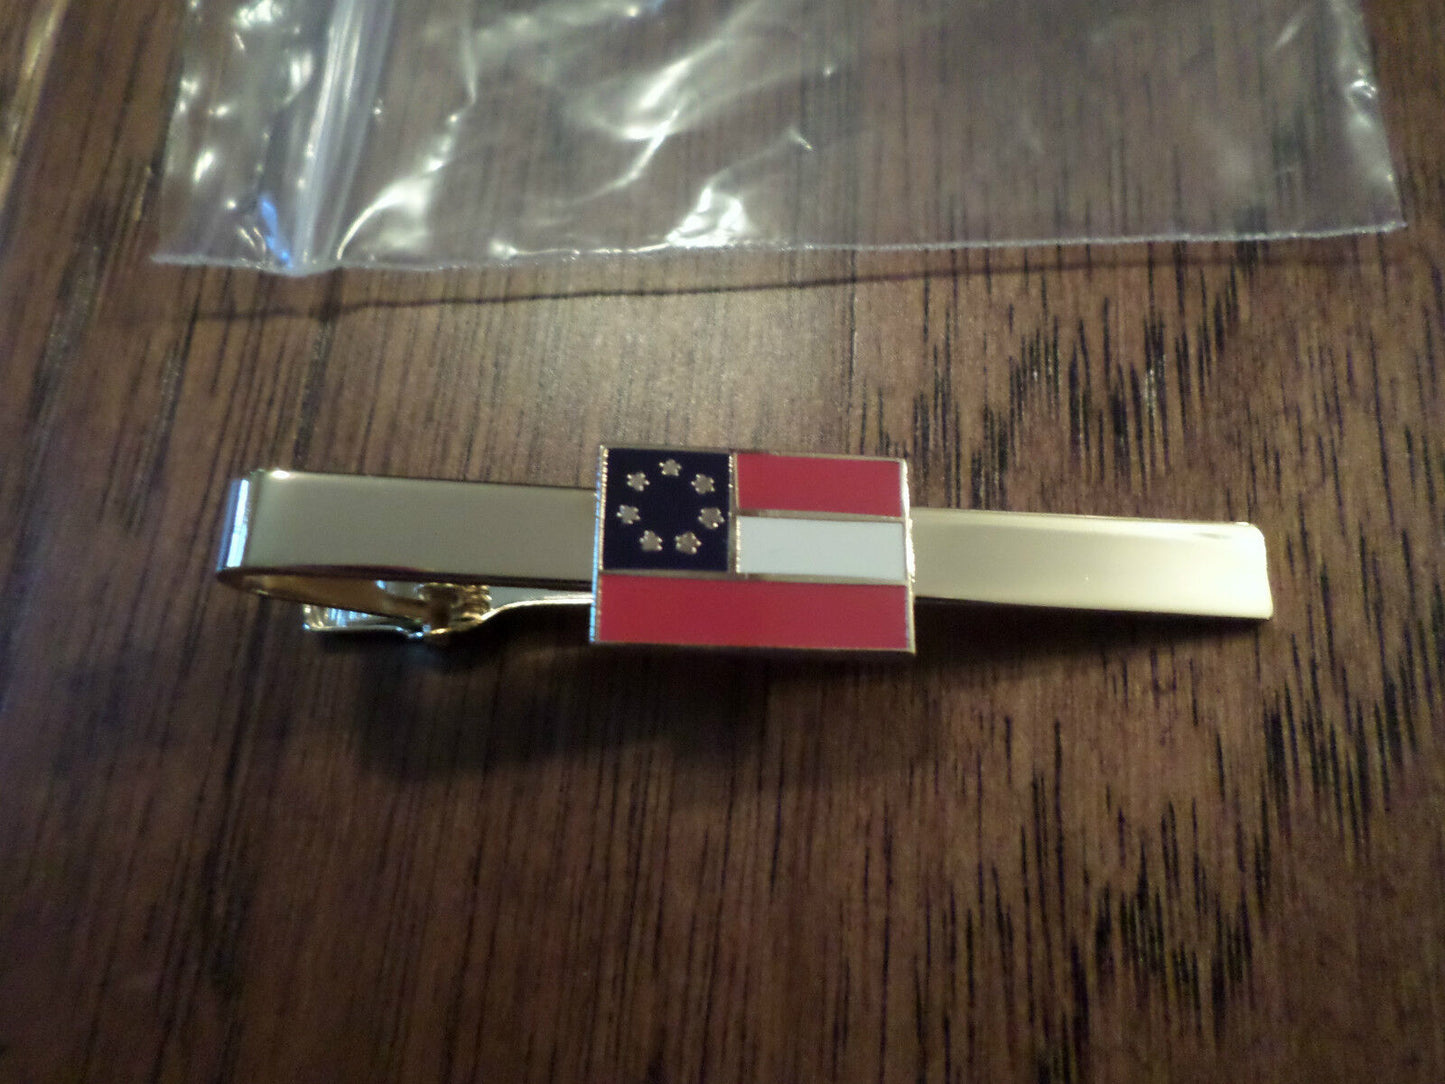 U.S.A FLAG TIE BAR TIE TAC GOLD COLOR BAR MADE IN THE U.S.A NEW IN BAGS